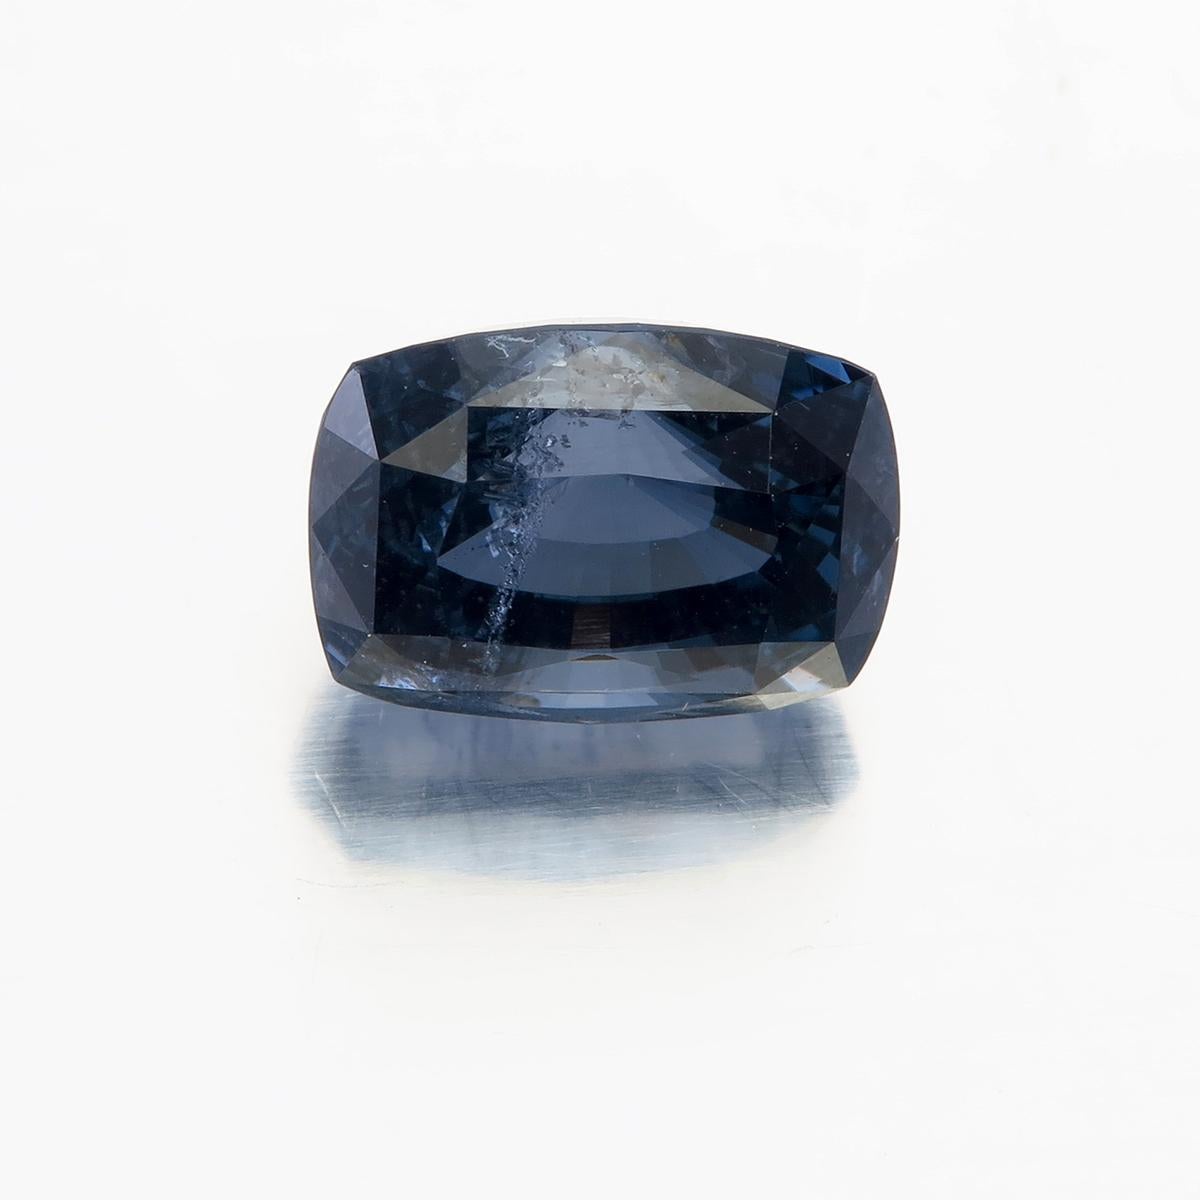 3.72 Carat Blue Spinel 
Shape: Antique Cushion
Faceted
Dimensions: 9.63 x 7.09 x 6.51 mm
Weight: 3.72 Carat
No Heat or treatment
Lotus report: 4093-7832